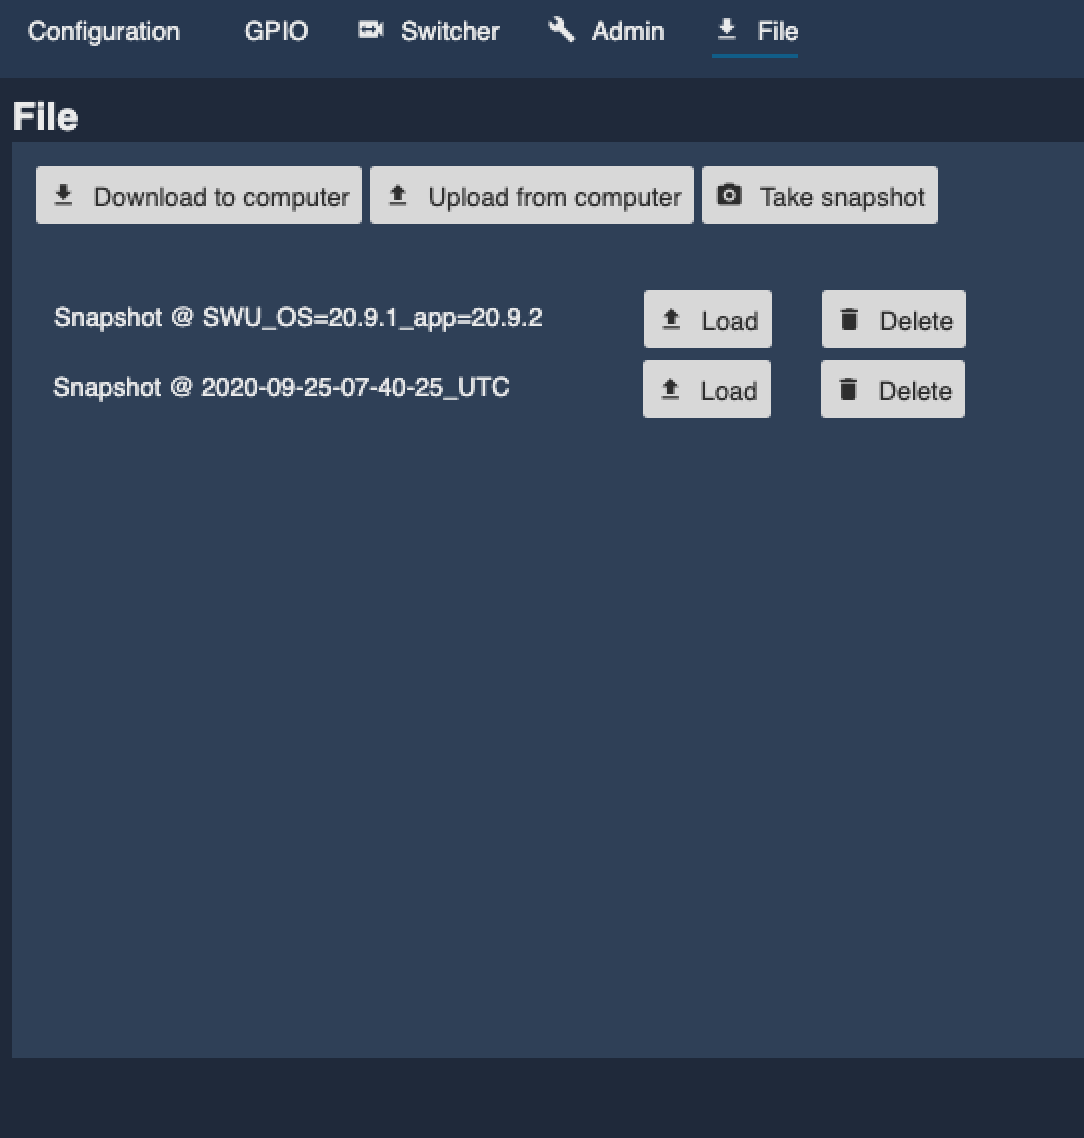 cyanview-support-manual-configuration-web-ui-gui-files-backup-snapshot